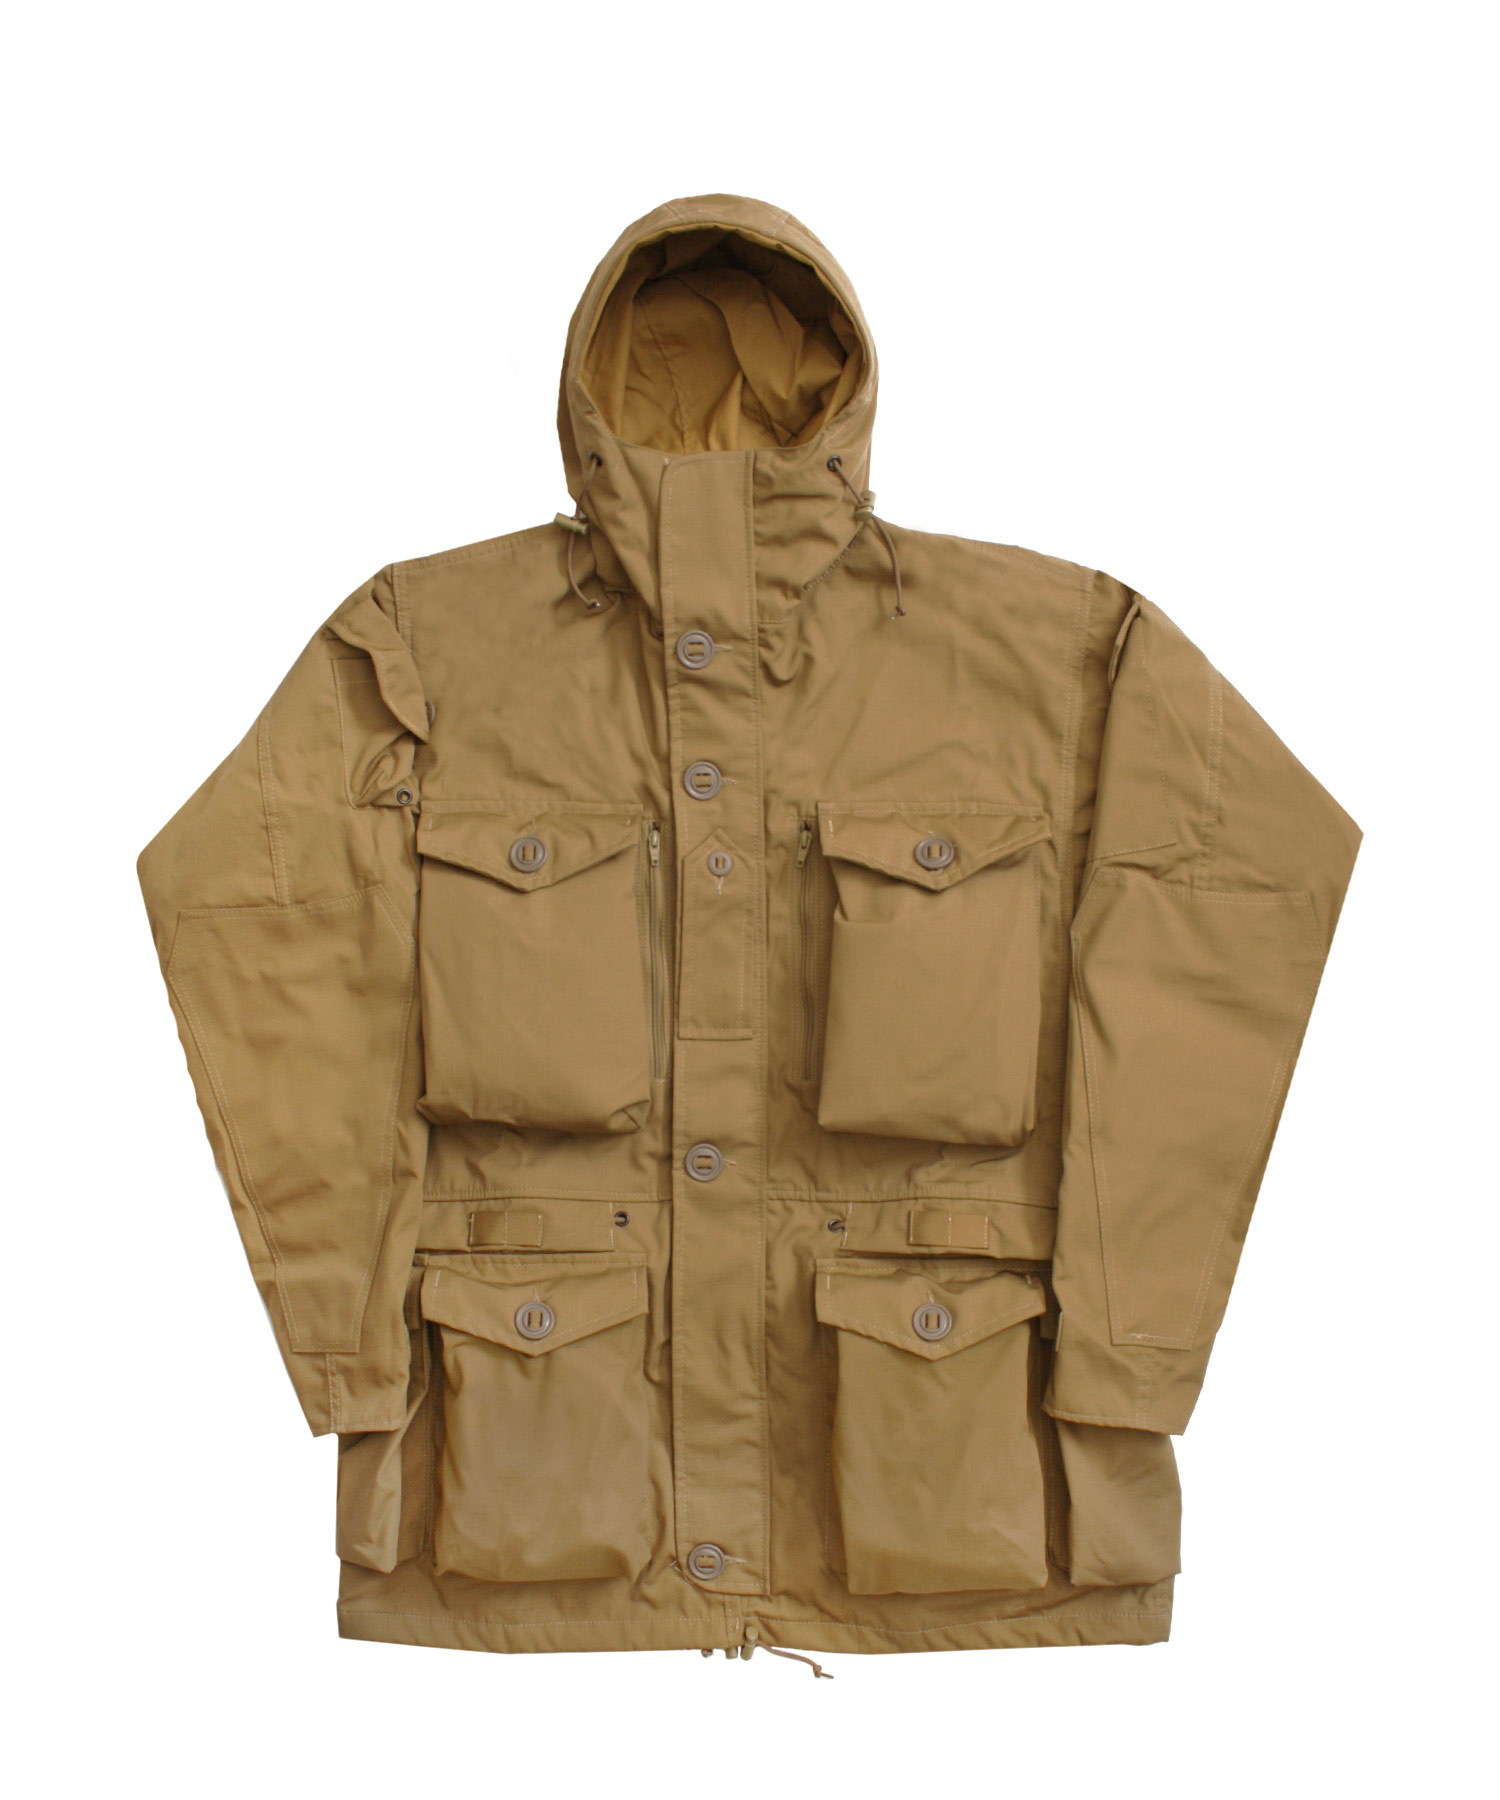 Looking for field jacket with civvie look and good ventilation ...